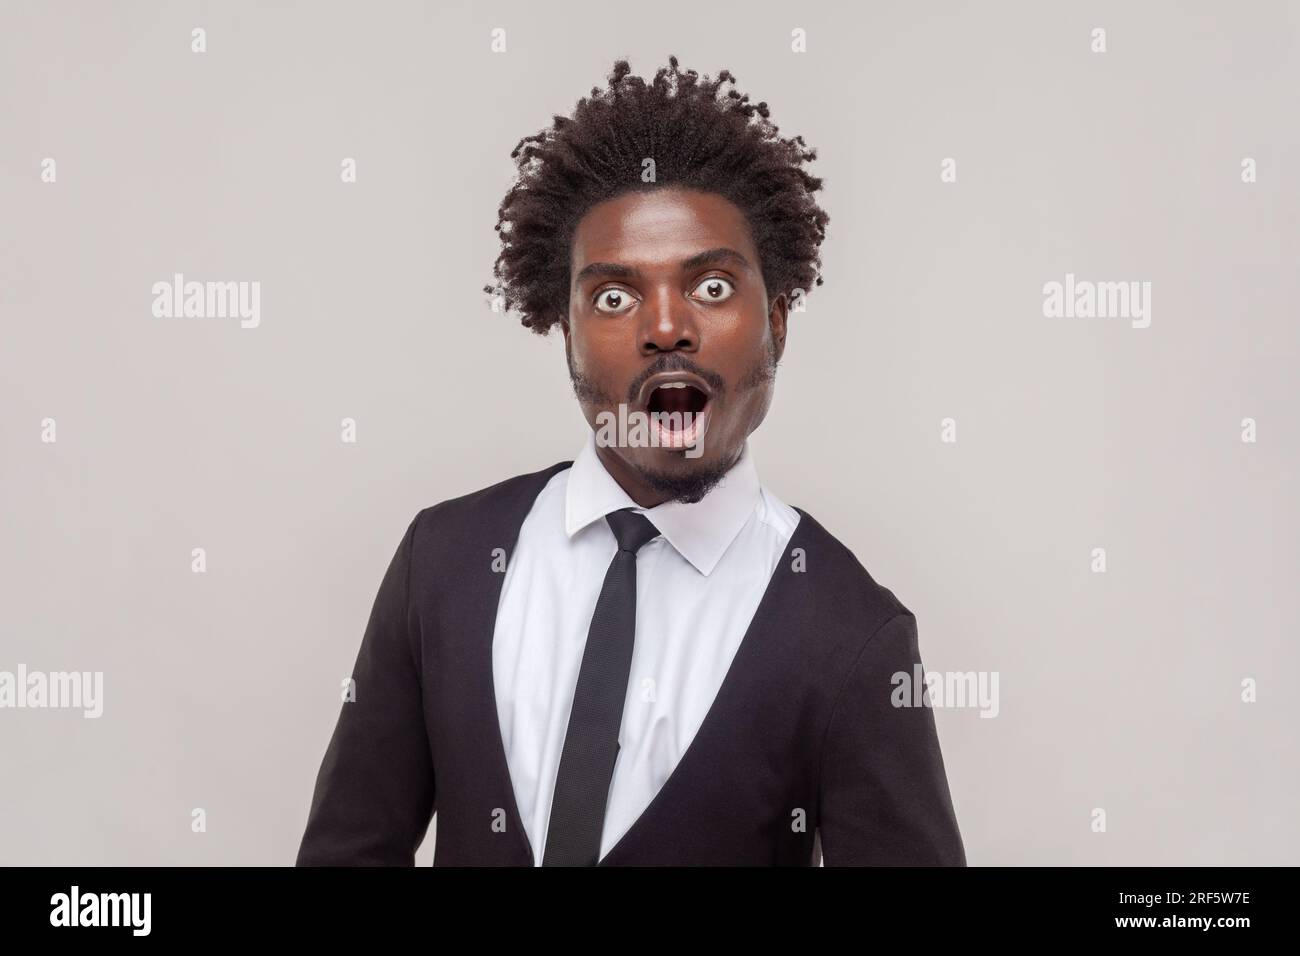 Shocked man with Afro hairstyle stares bugged eyes, feels anxious ...